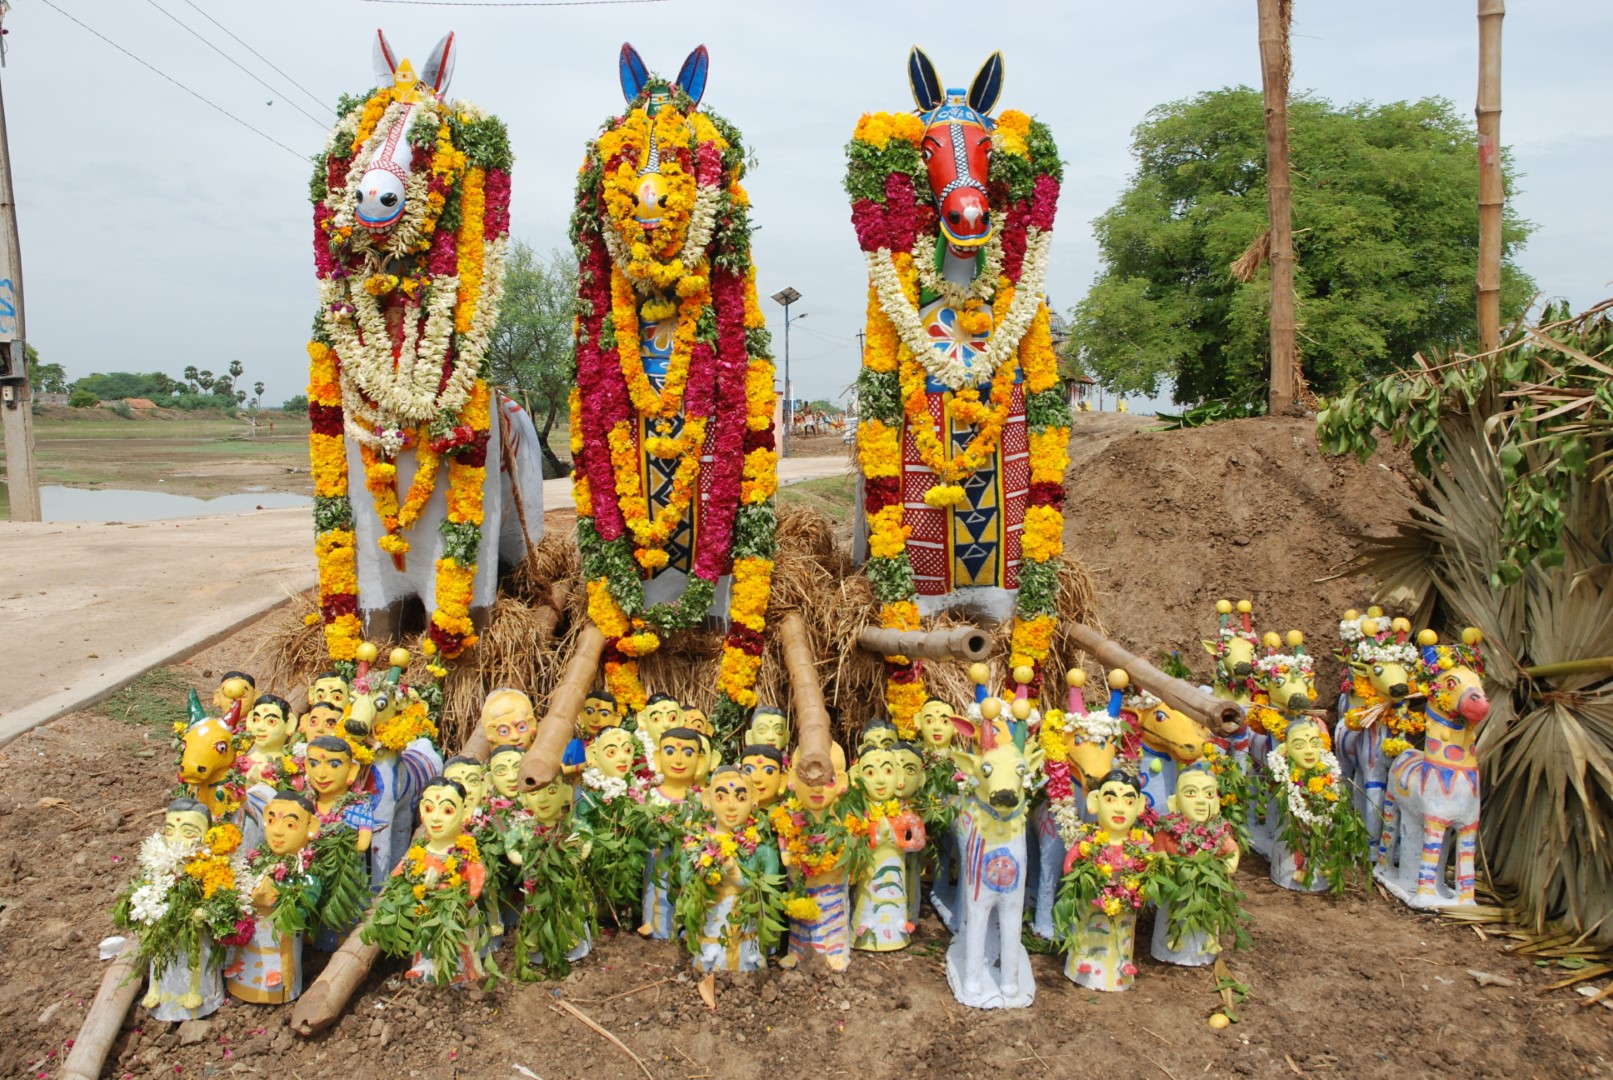 <span style="font-weight:normal;">The day before this photo was taken, these three <i>ure-kutherai</i> (village horses) and numerous smaller offerings left the potters' village and were placed just outside the shrine's gates. They will be carried into the shrine the following evening.</span>